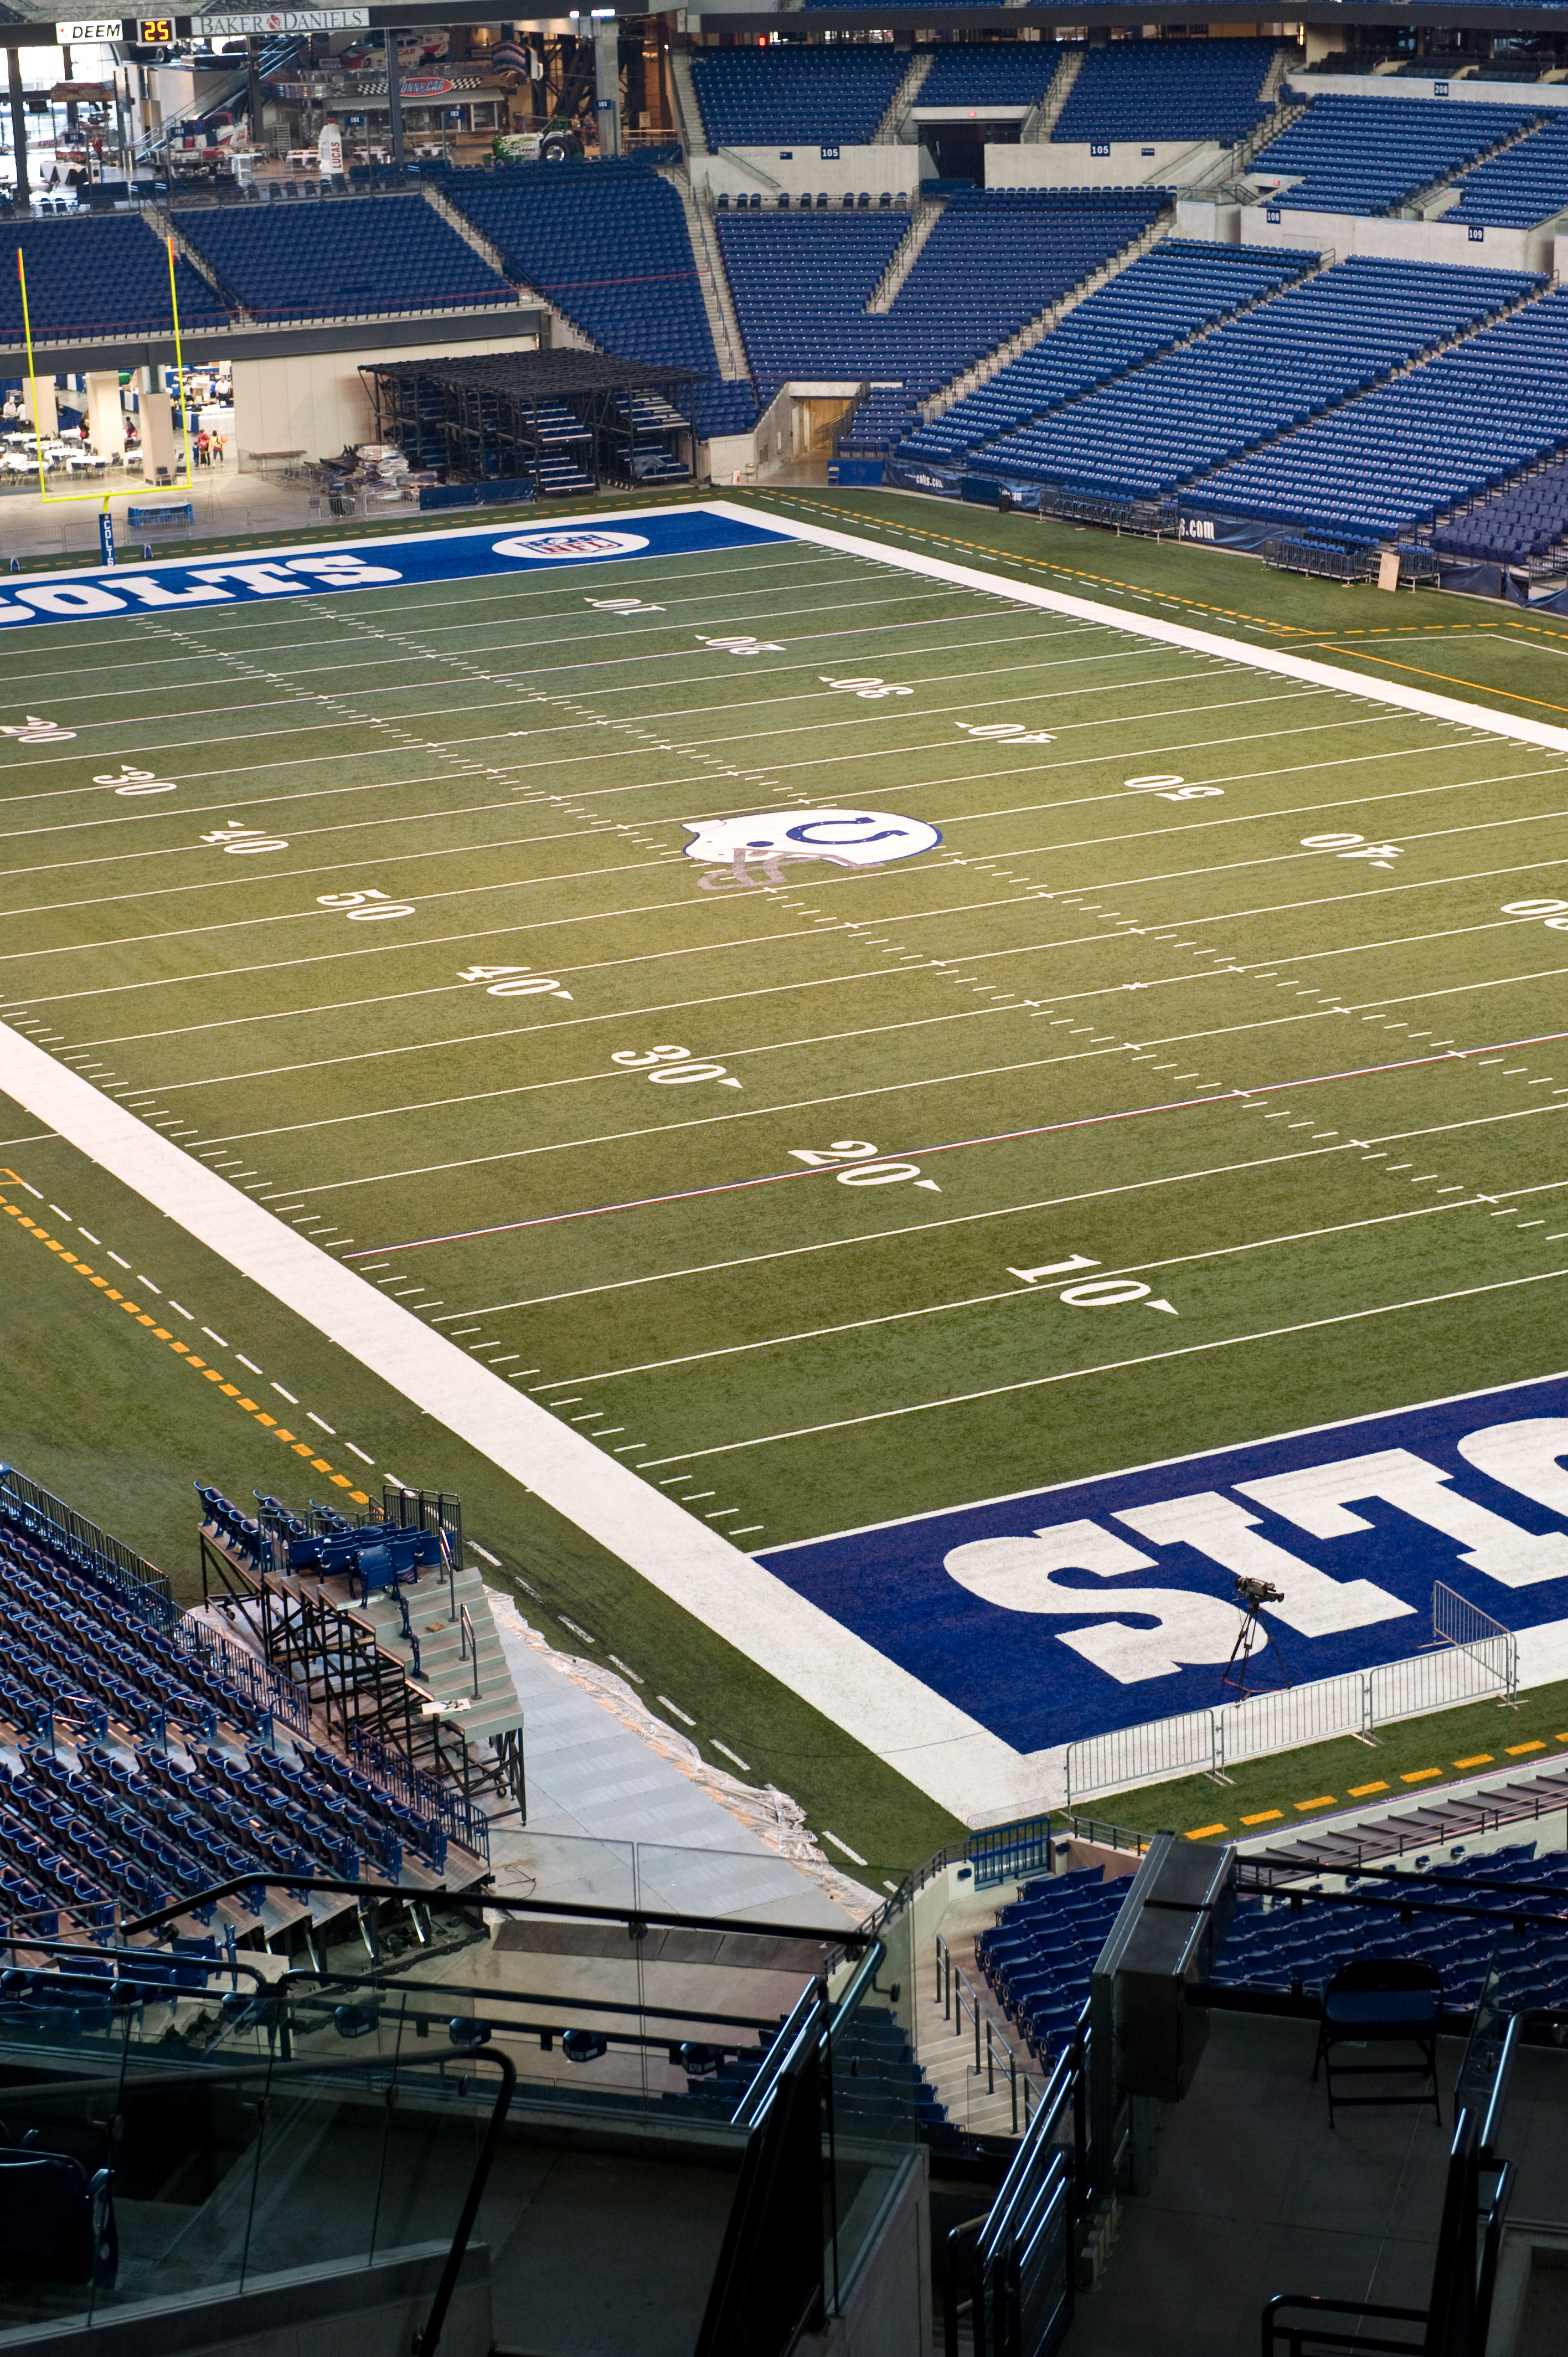 https://upload.wikimedia.org/wikipedia/commons/5/5a/Lucas_Oil_Stadium_-_Indianapolis_Colts_-_2868434042.jpg